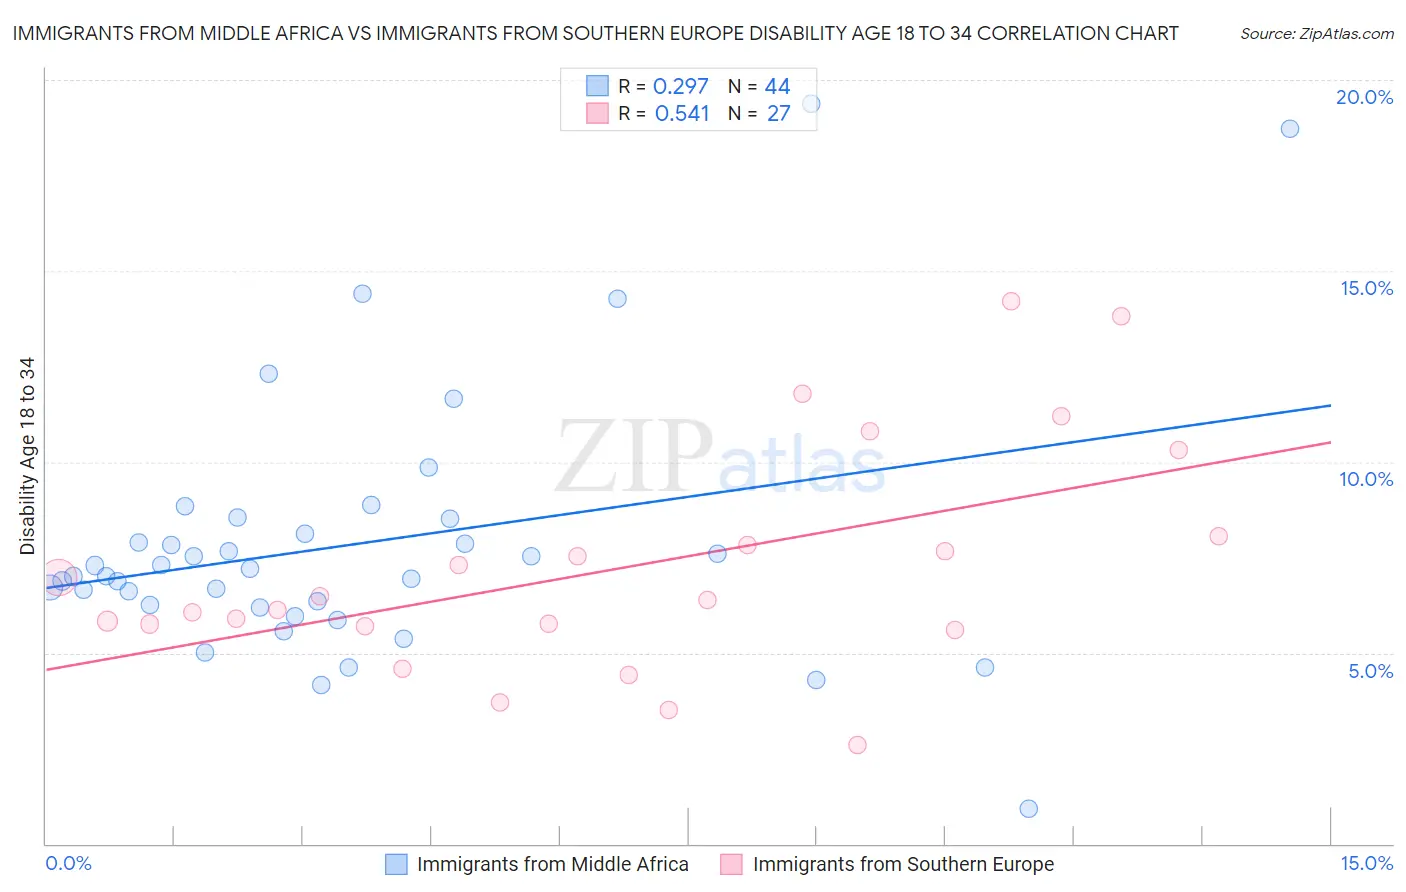 Immigrants from Middle Africa vs Immigrants from Southern Europe Disability Age 18 to 34